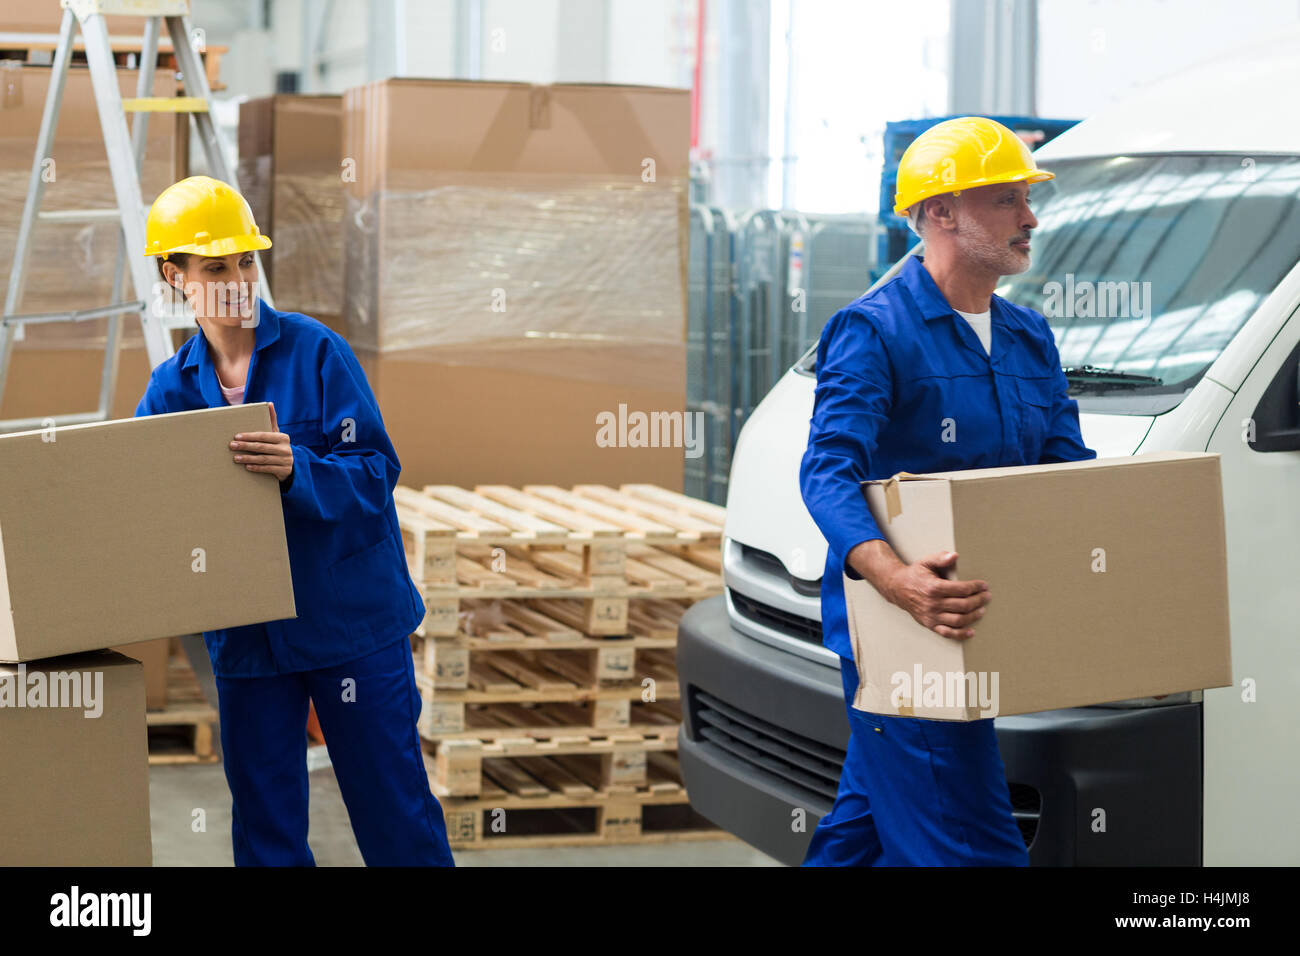 Delivery workers unloading cardboard boxes from pallet jack Stock Photo